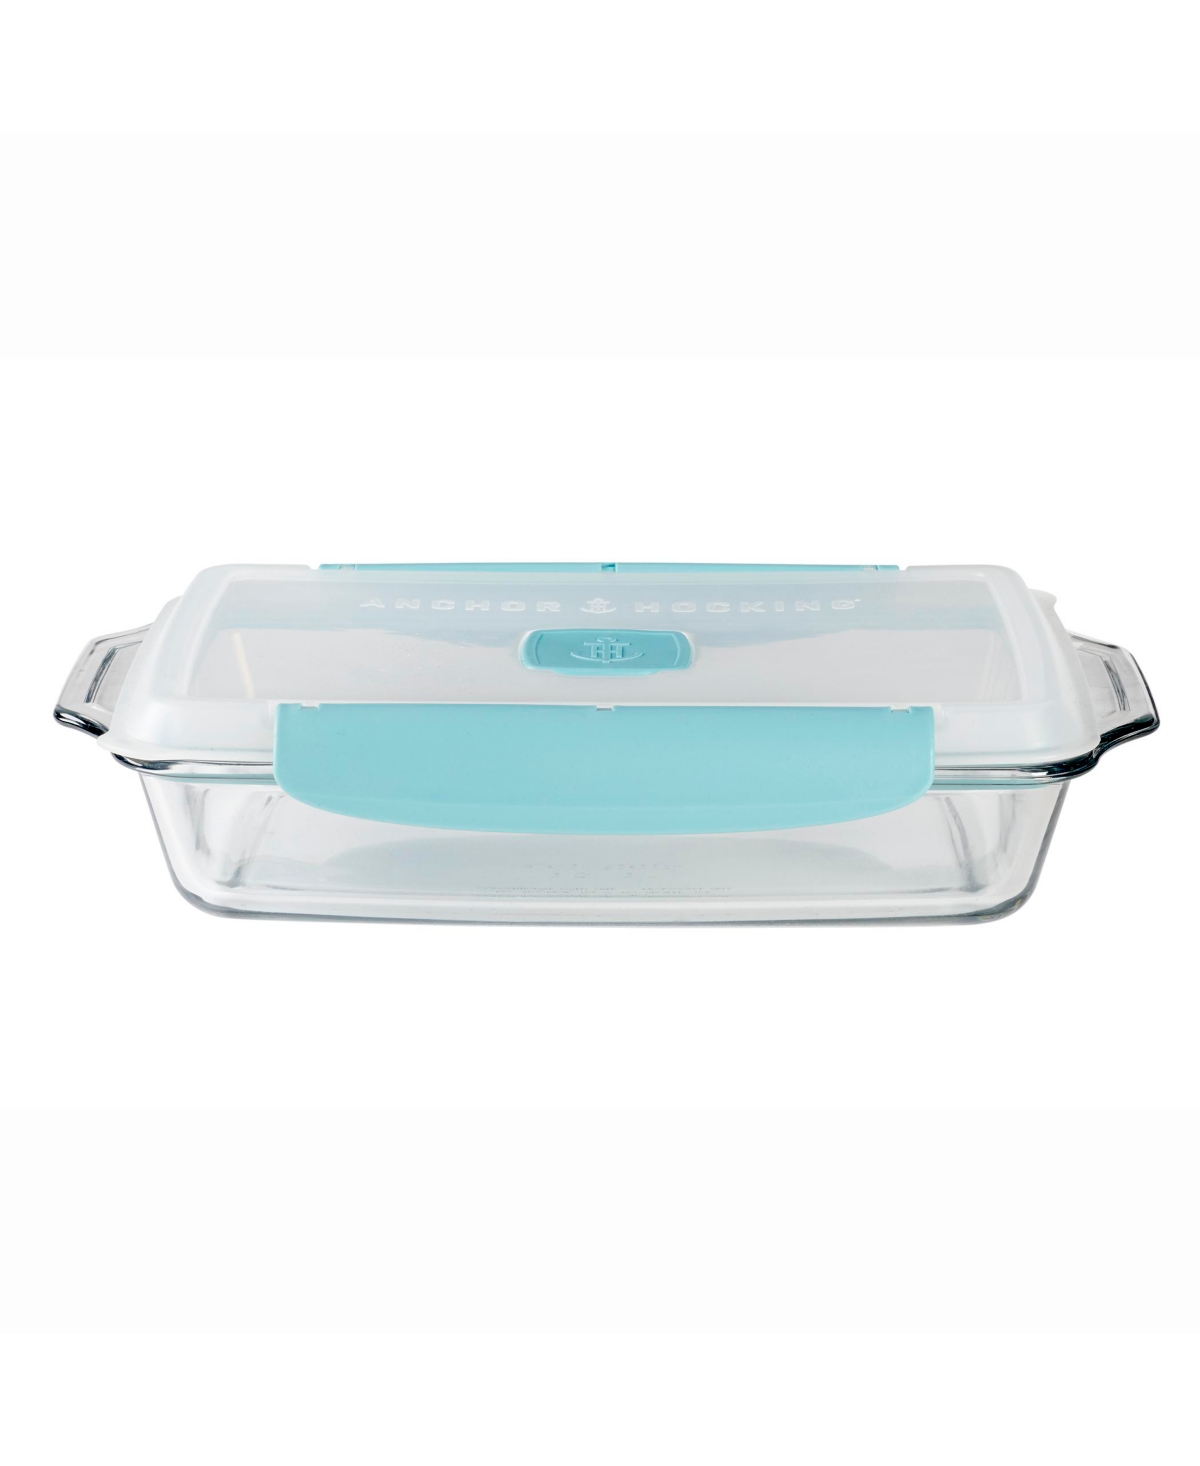 Anchor Hocking Glass 3 Quarts Bake Dish With Truelock Lid, 2 Piece Set In Clear Glass,mineral Blue Lid